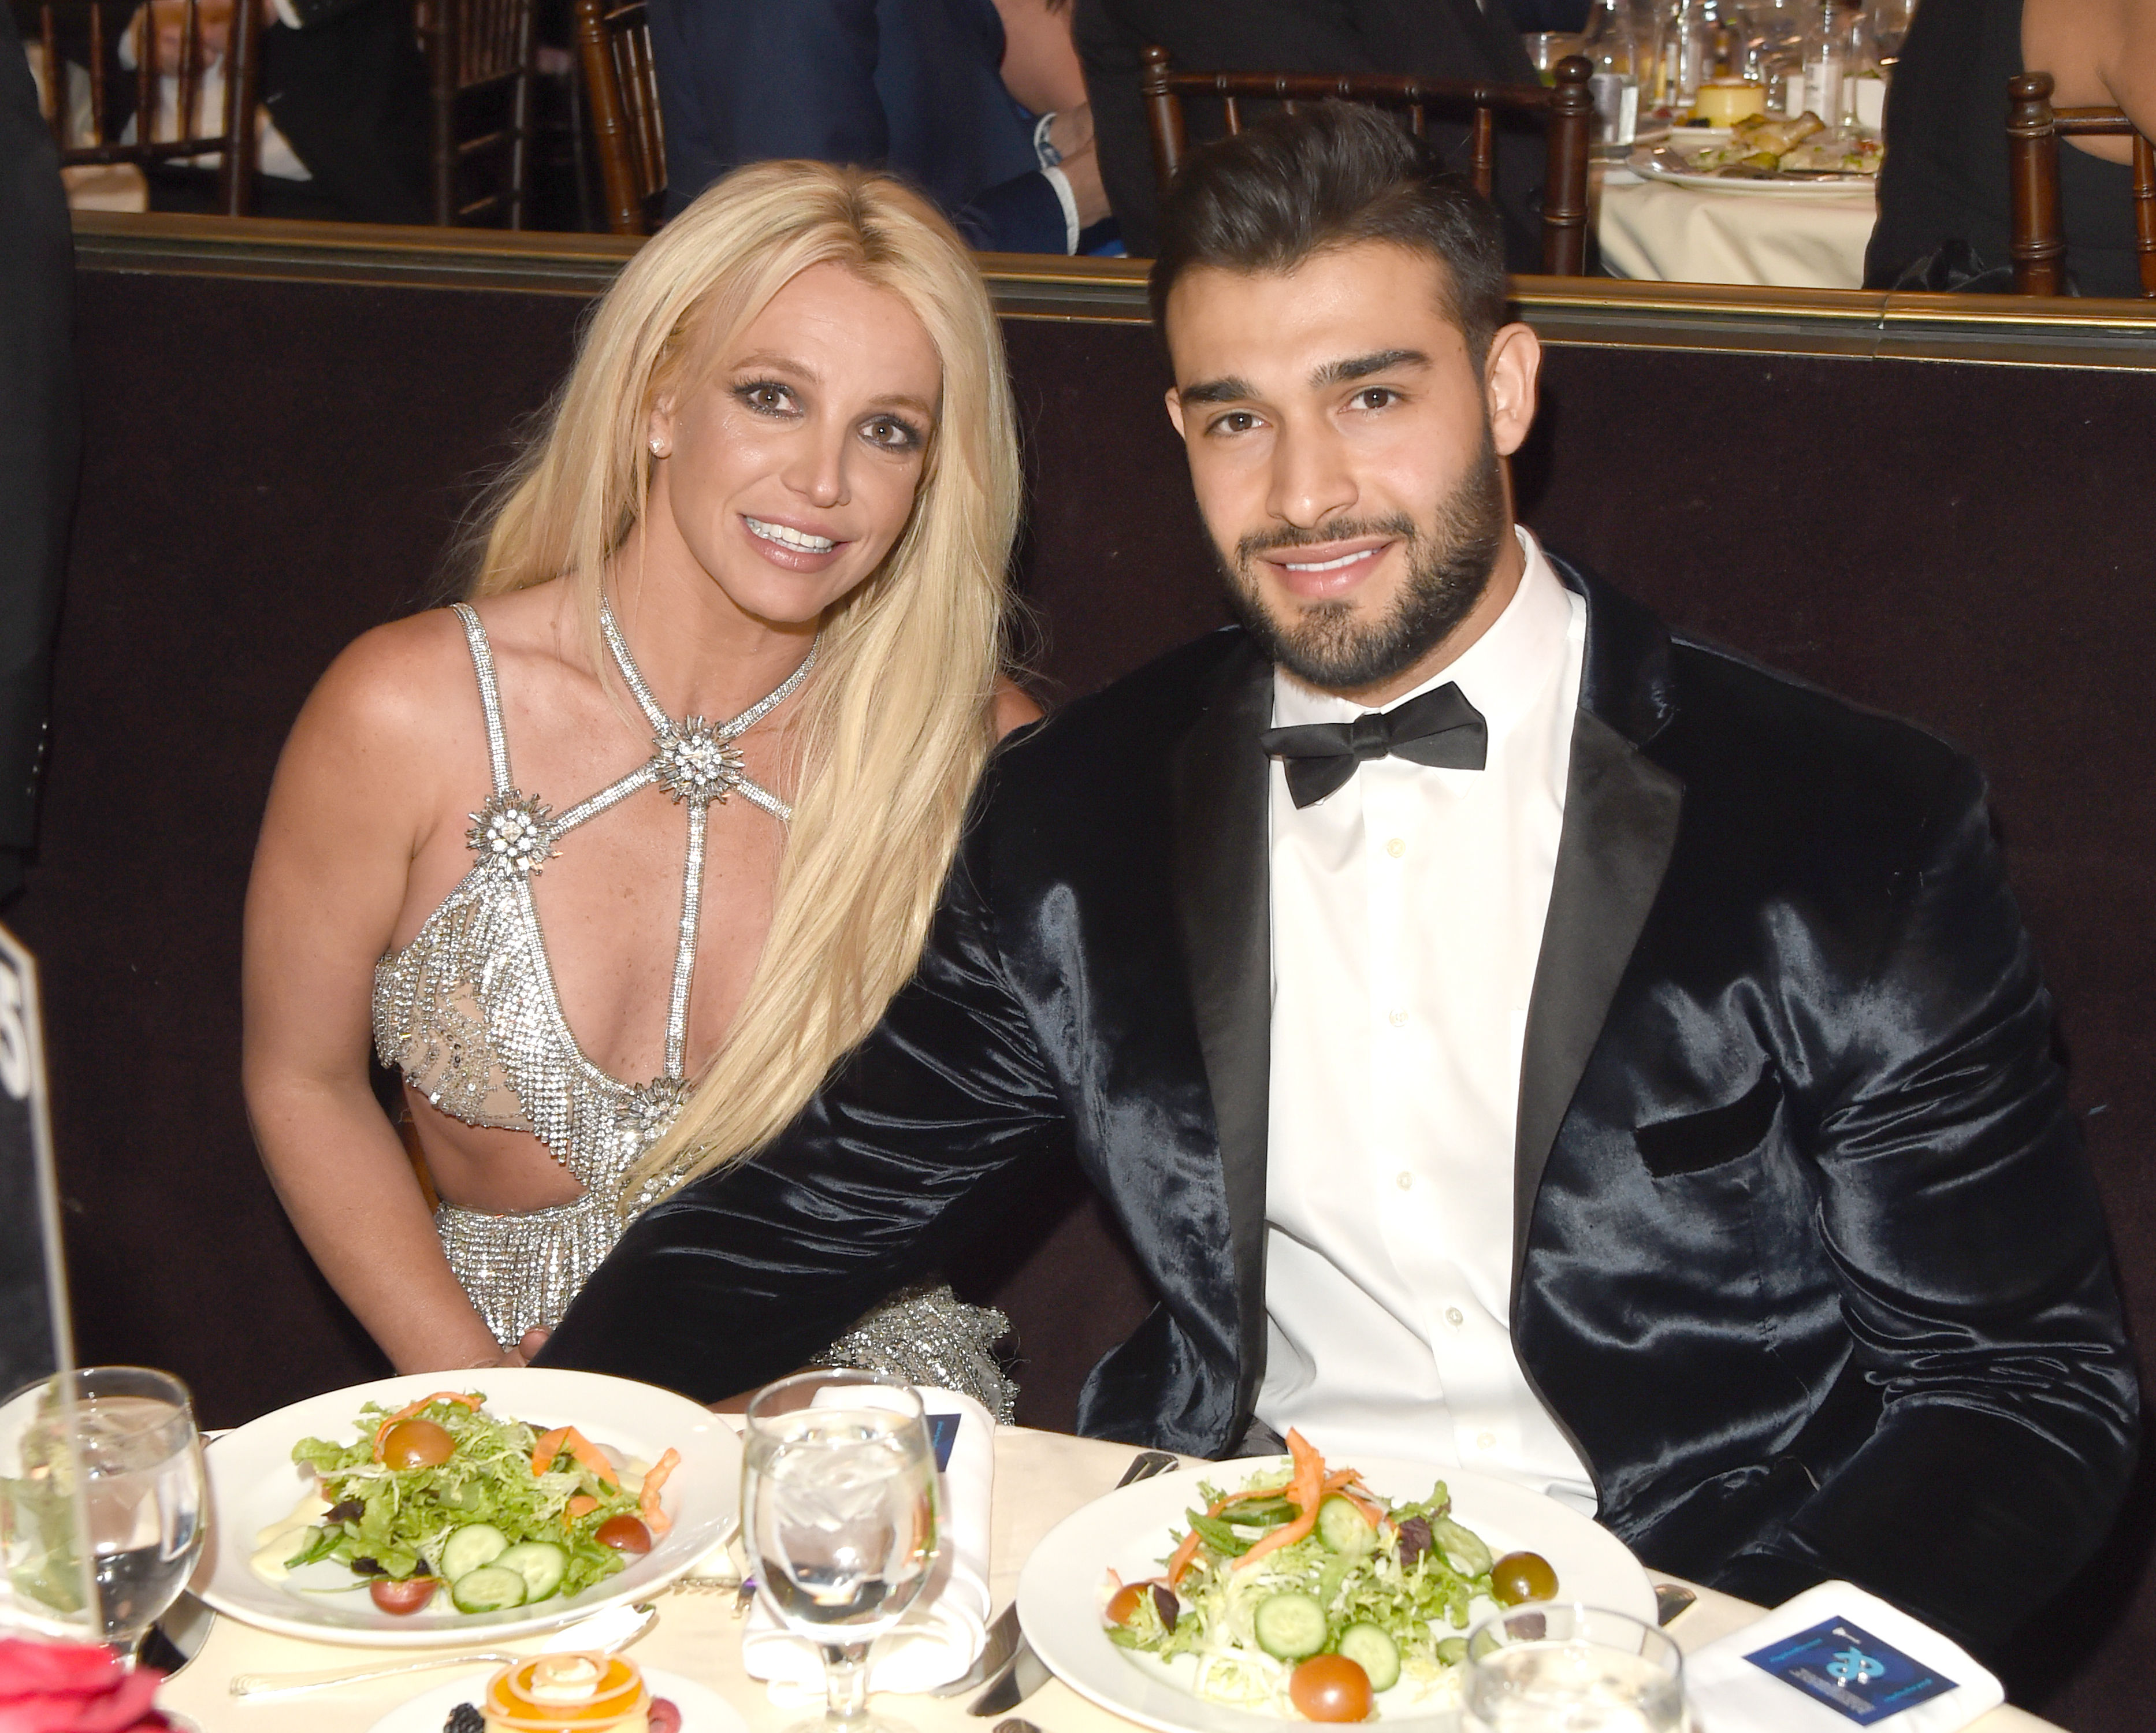 Britney Spears and Sam Asghari sitting at a table during an event with salads in front of them. Britney is wearing a sparkly with cutouts and Sam is wearing a tuxedo